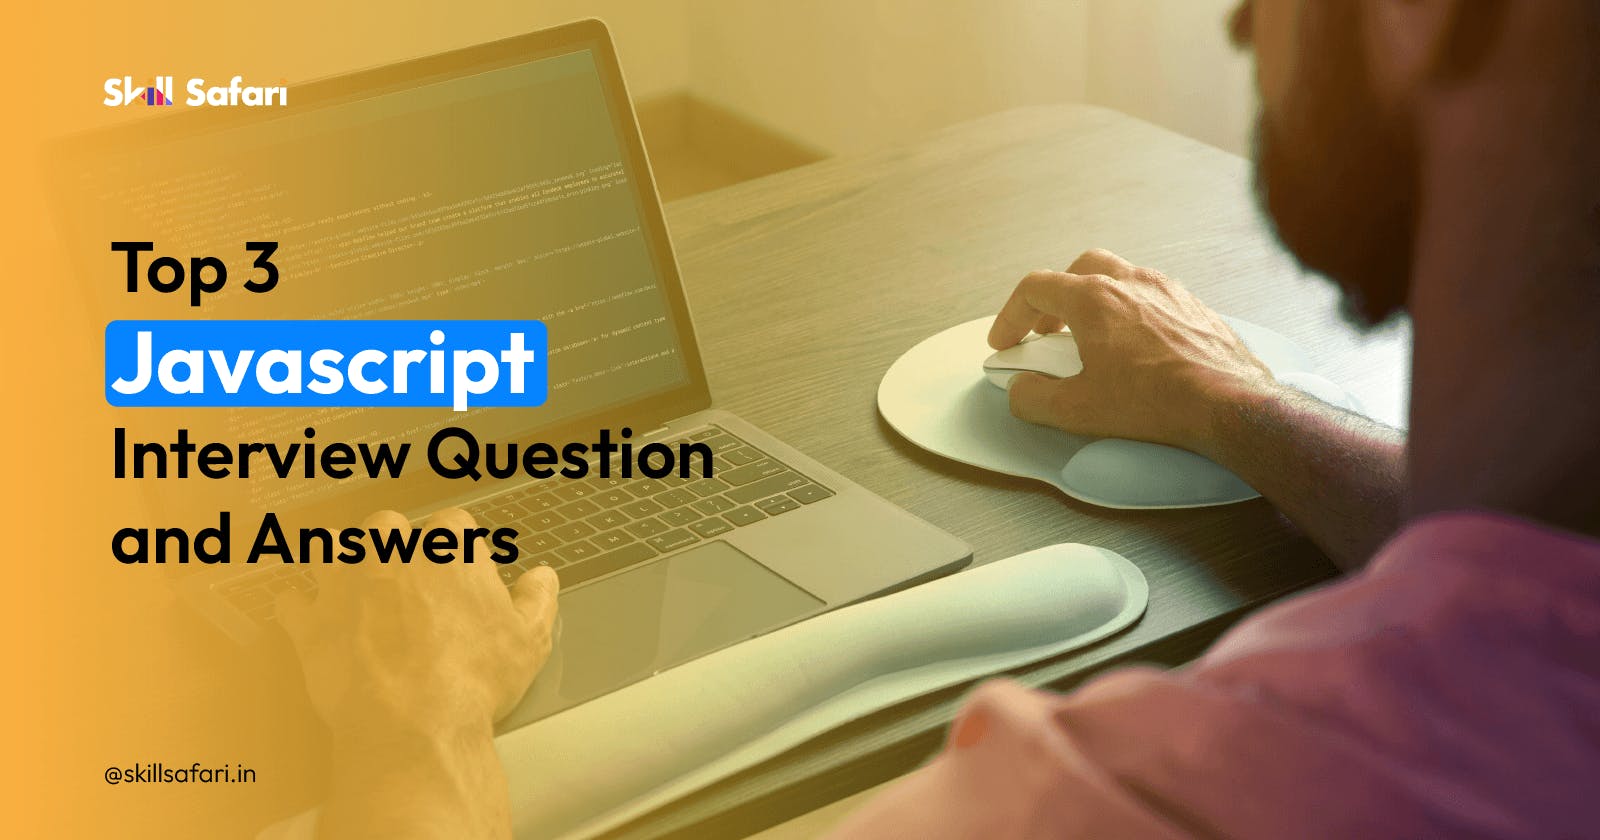 Top 3 JavaScript Interview Questions and Answers